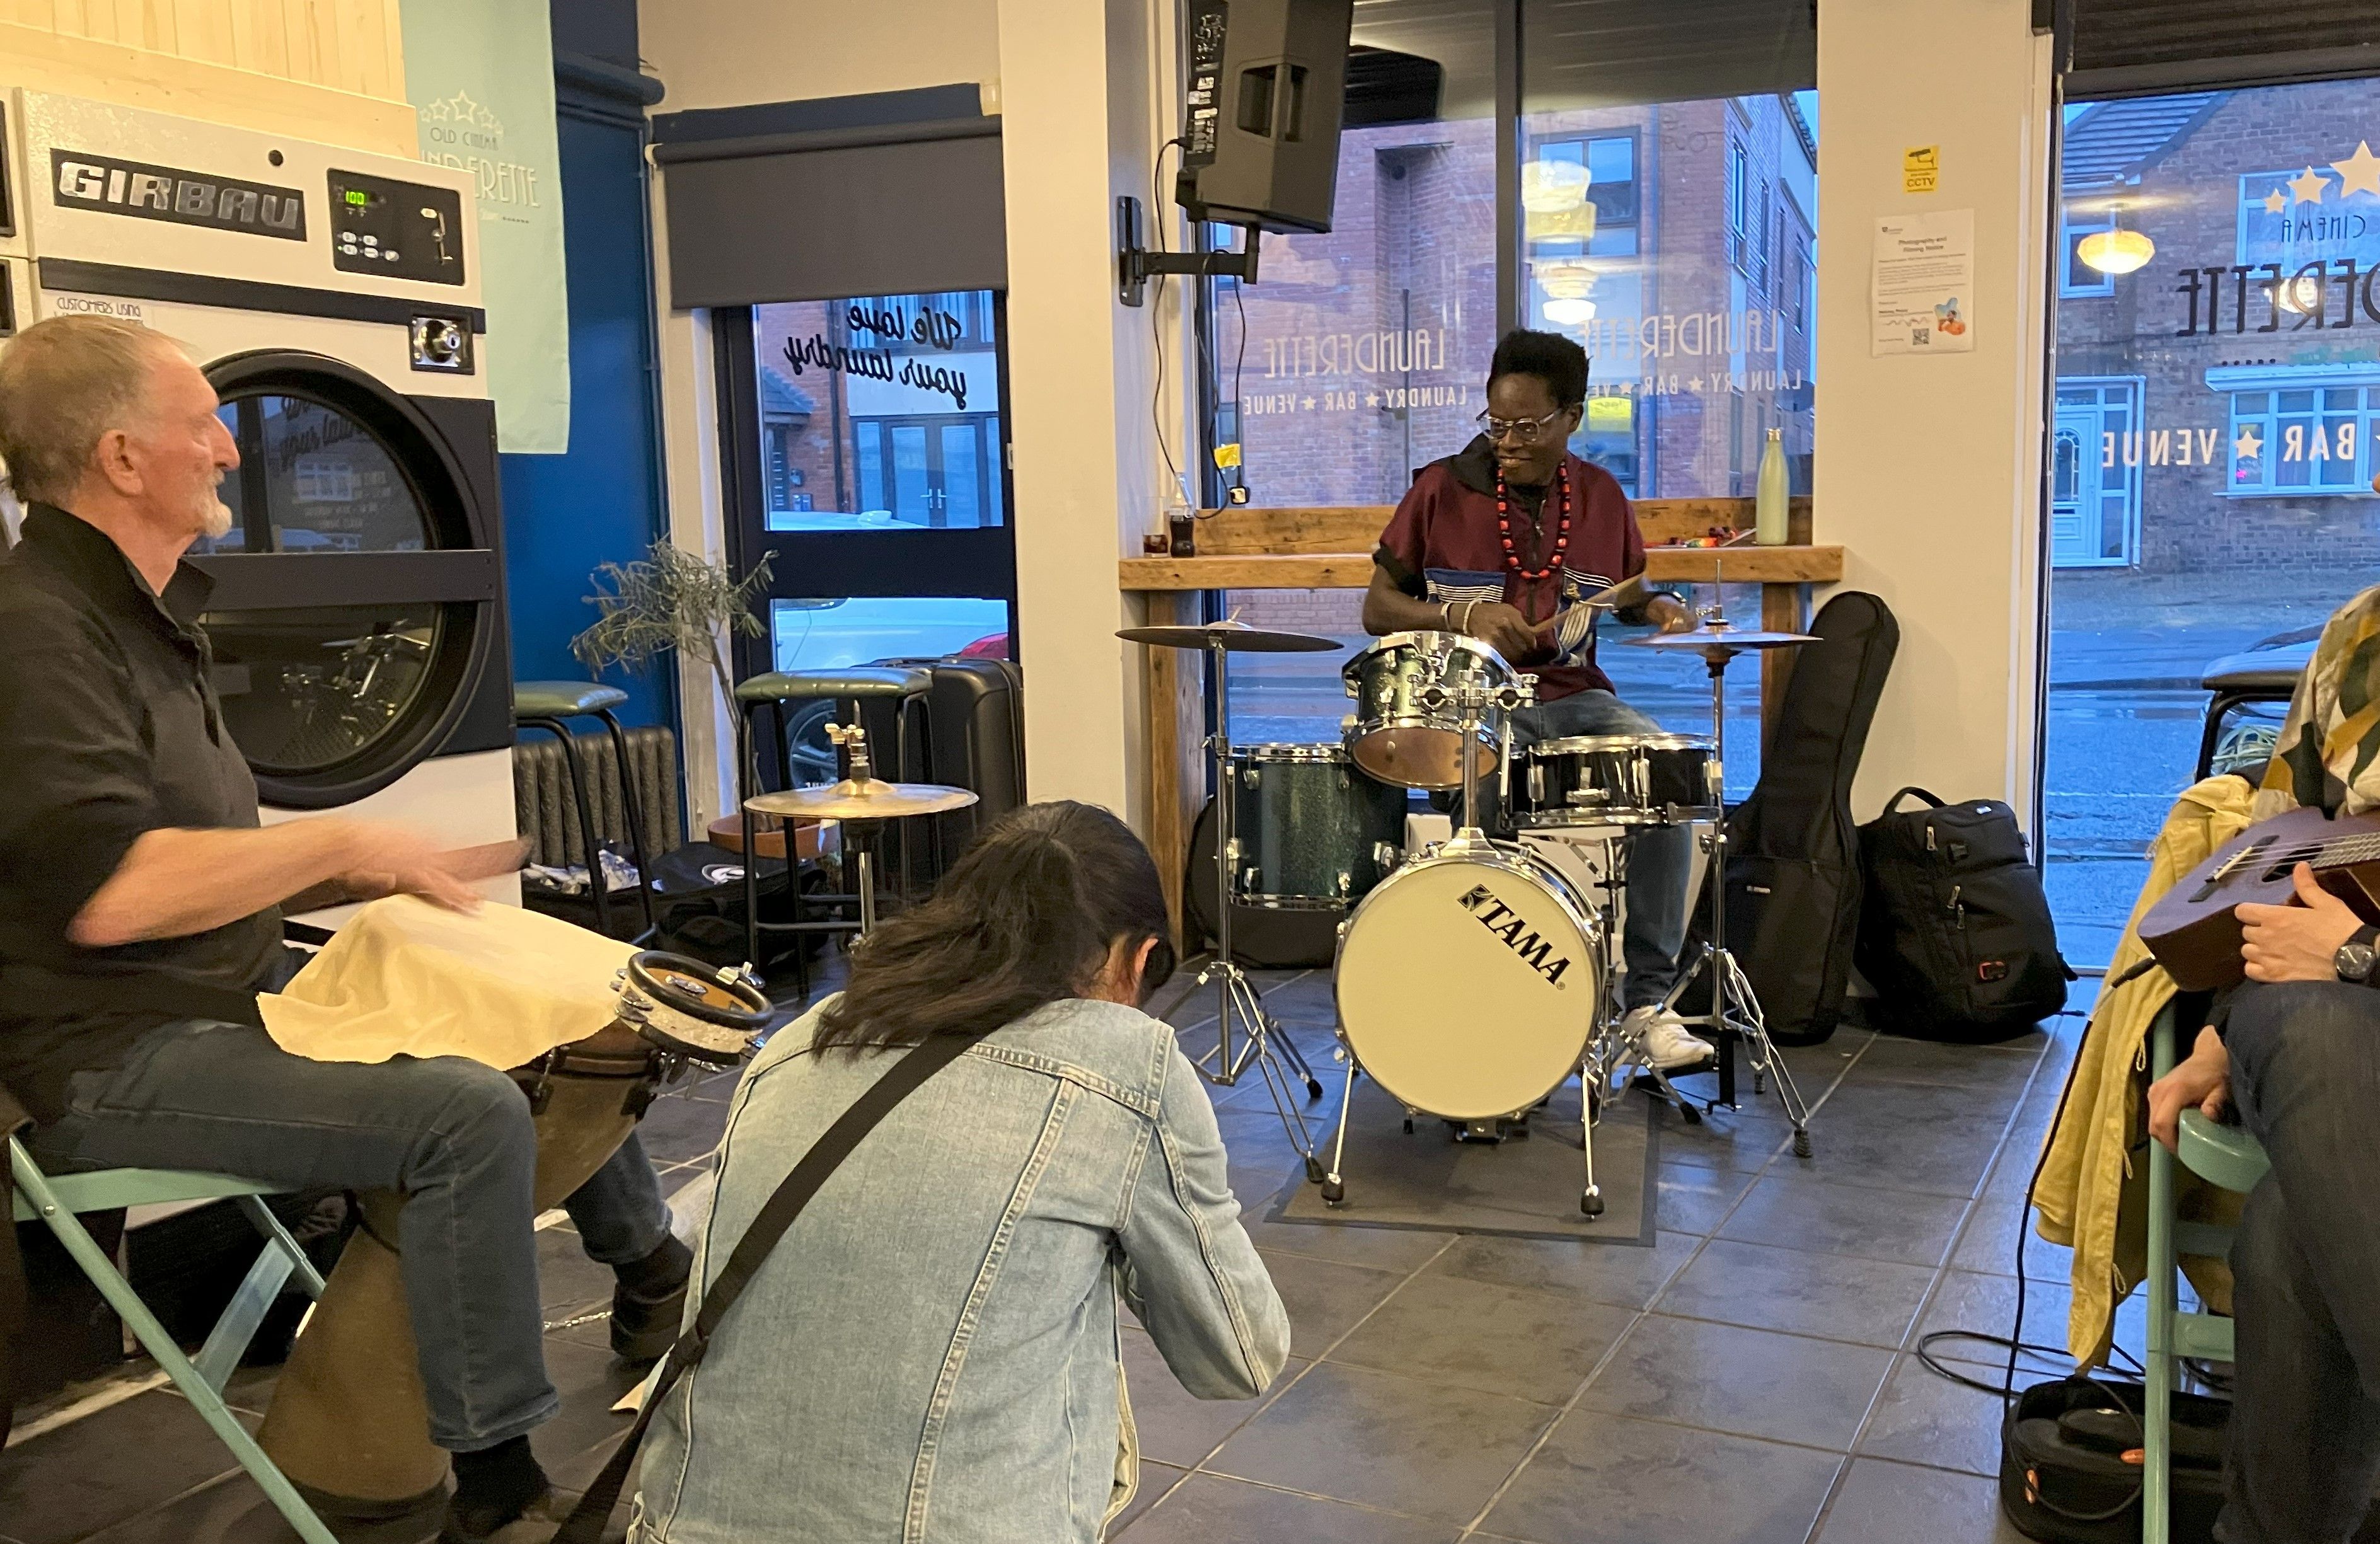 Jam-Session with students and musicians from Durham at Old Cinema Launderette in Gilesgate